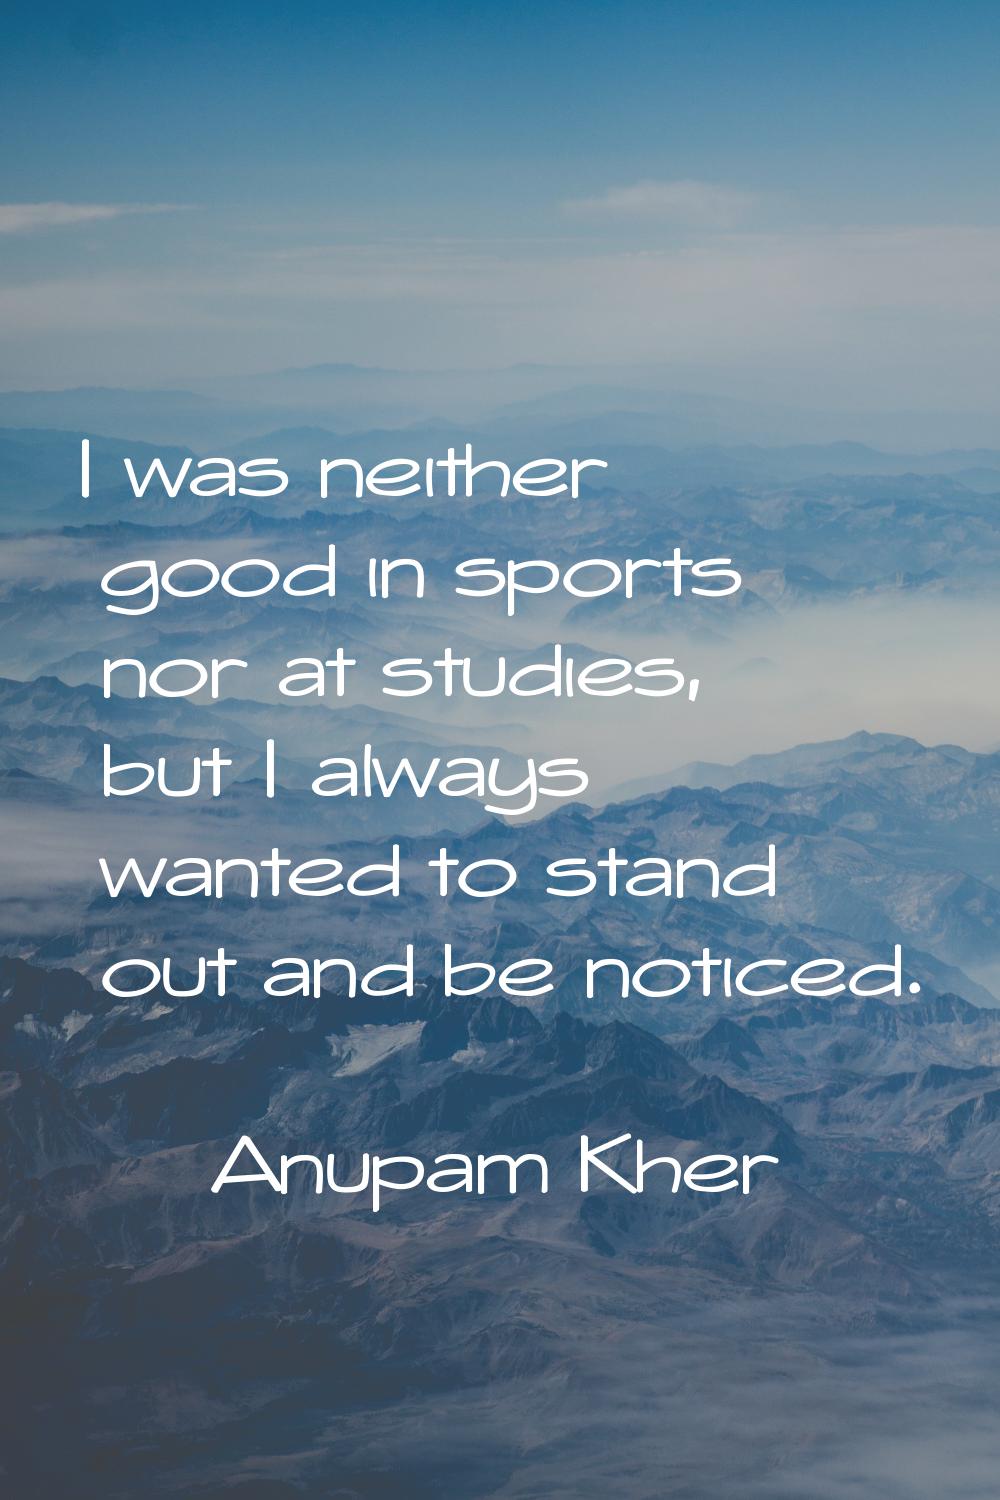 I was neither good in sports nor at studies, but I always wanted to stand out and be noticed.